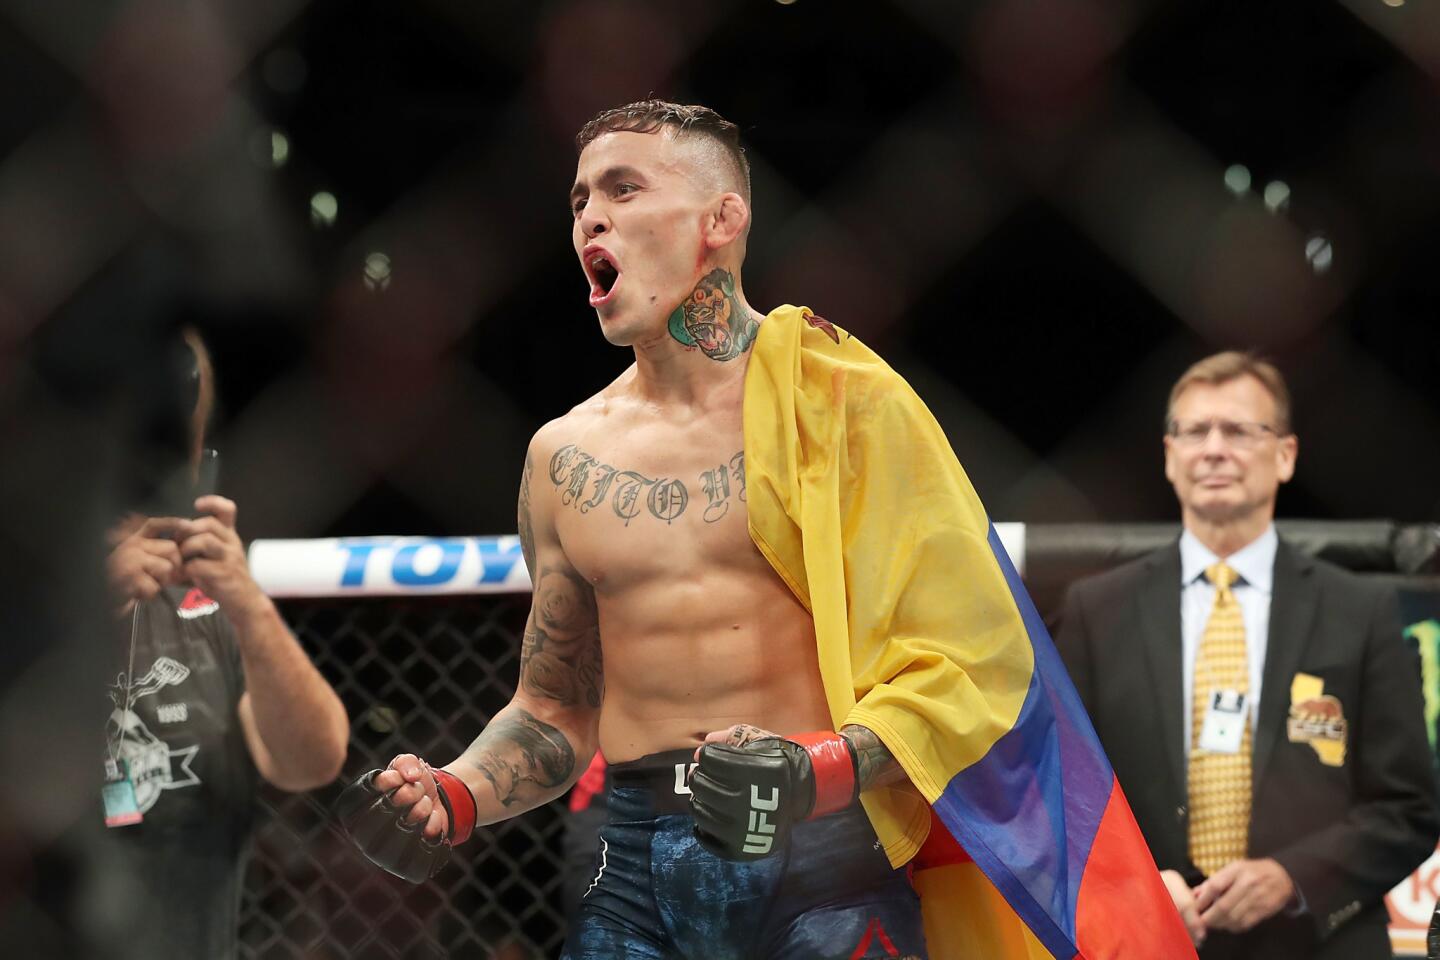 LOS ANGELES, CA - AUGUST 04: Marlon Vera celebrates his win in the second round against Wuliji Buren in the bantamweight bout during UFC 227 at Staples Center on August 4, 2018 in Los Angeles, United States. (Photo by Joe Scarnici/Getty Images) ** OUTS - ELSENT, FPG, CM - OUTS * NM, PH, VA if sourced by CT, LA or MoD **